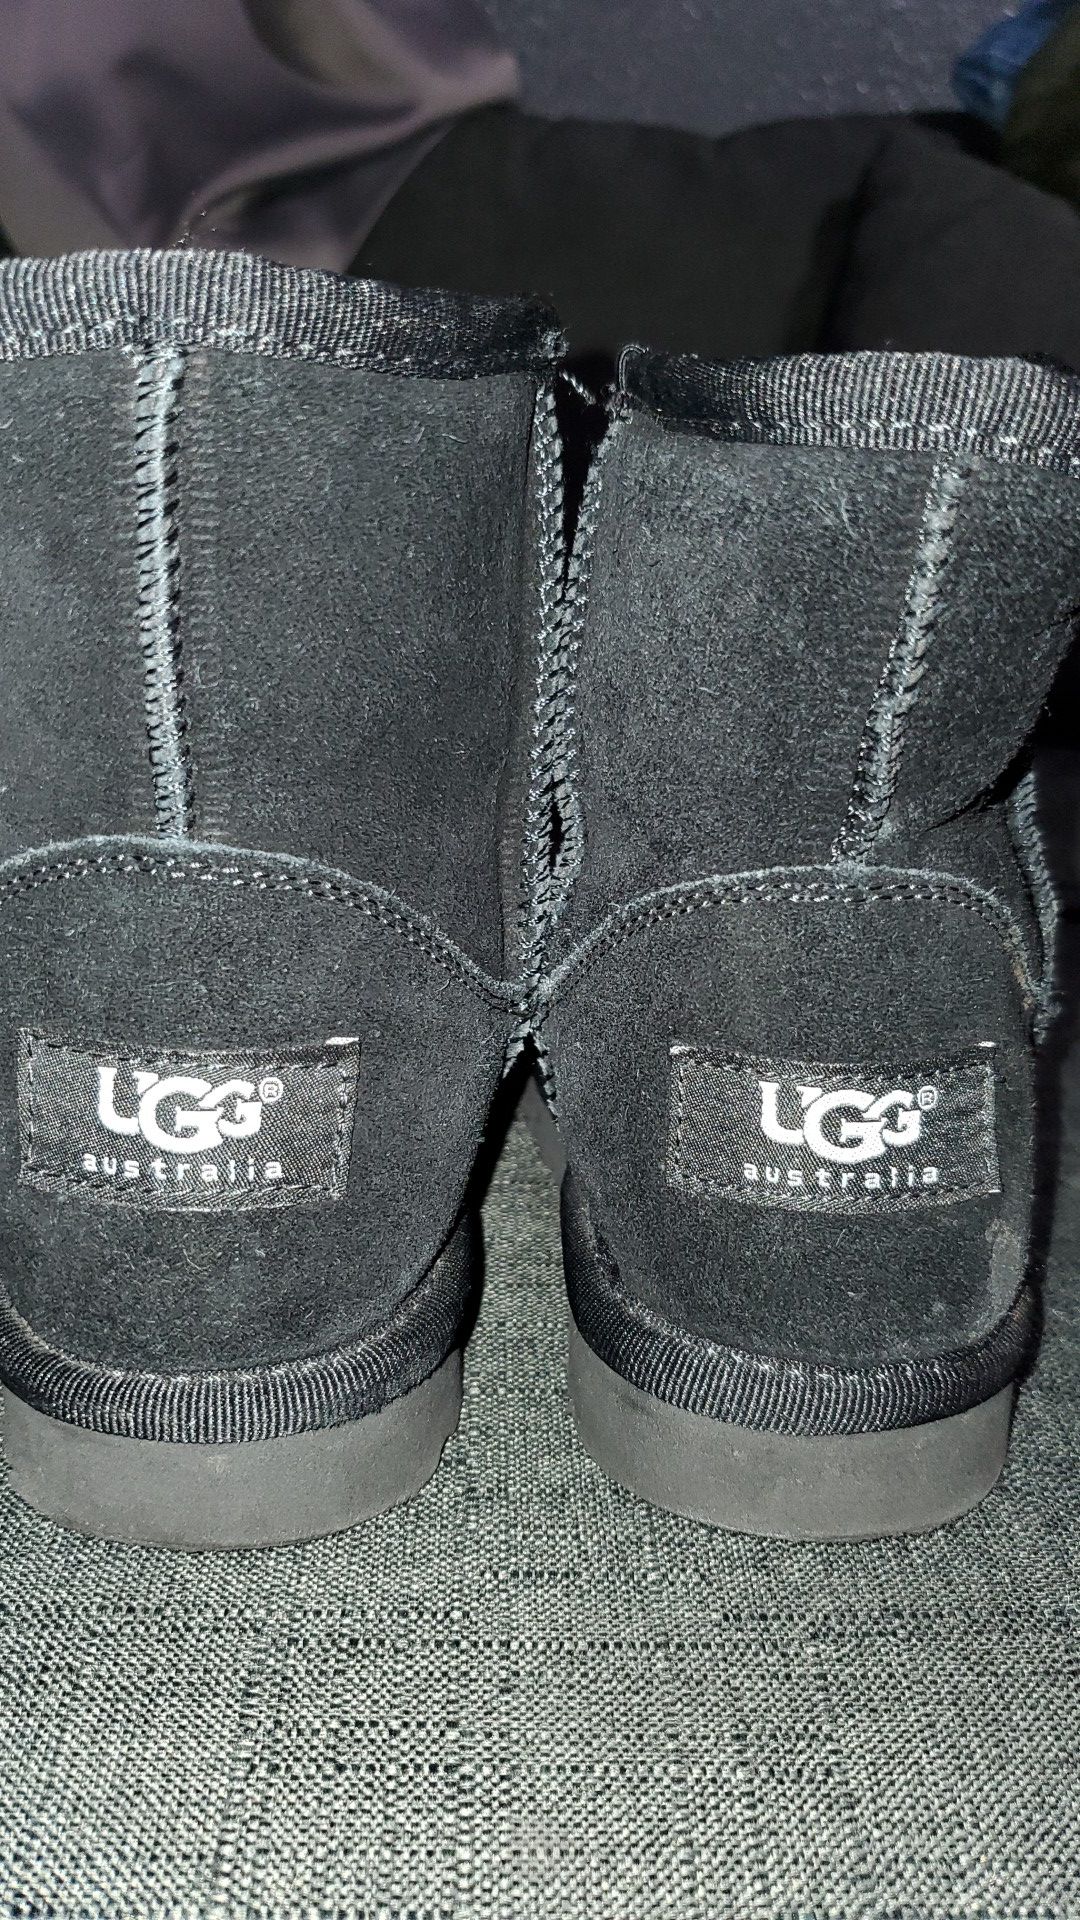 UGG BOOTS... girl's size 13